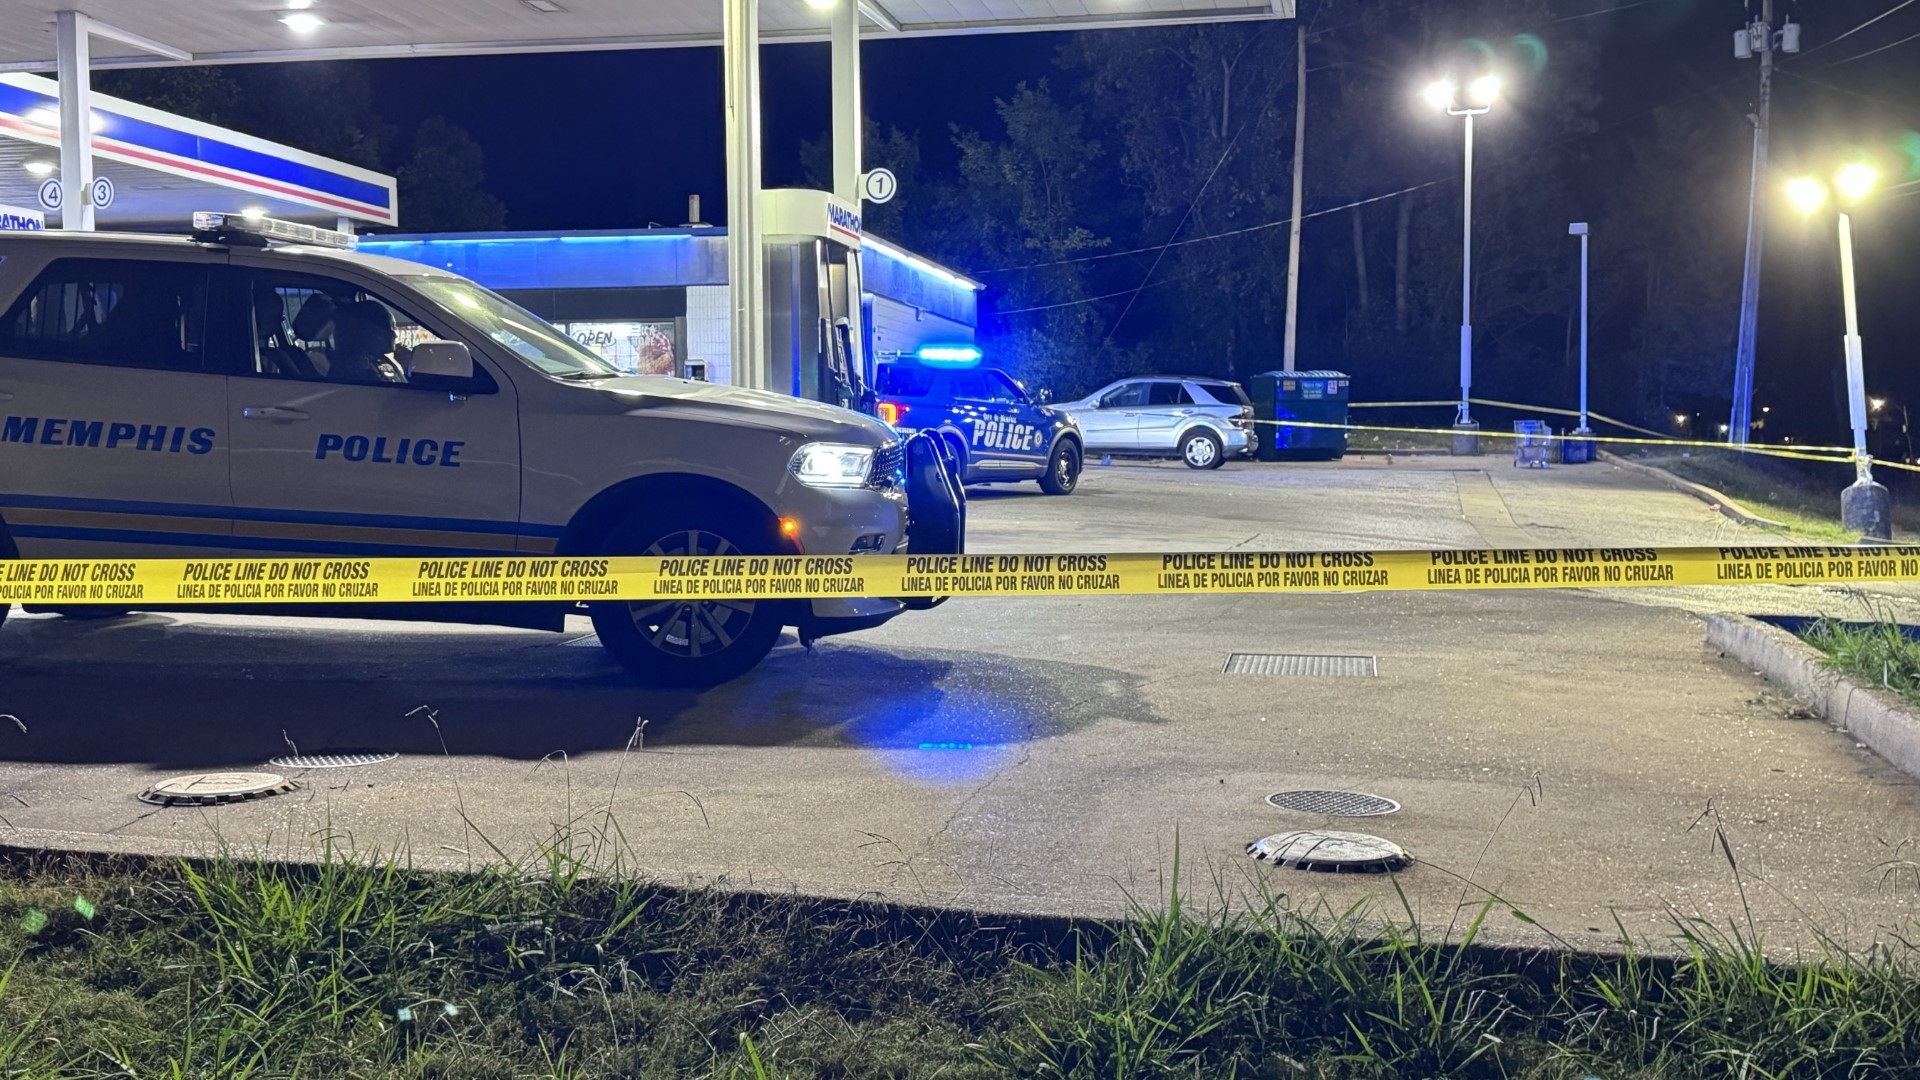 Memphis Police responded to the shooting Sunday around 9:30 p.m. in the 600 block of East Shelby Drive at the Marathon gas station.